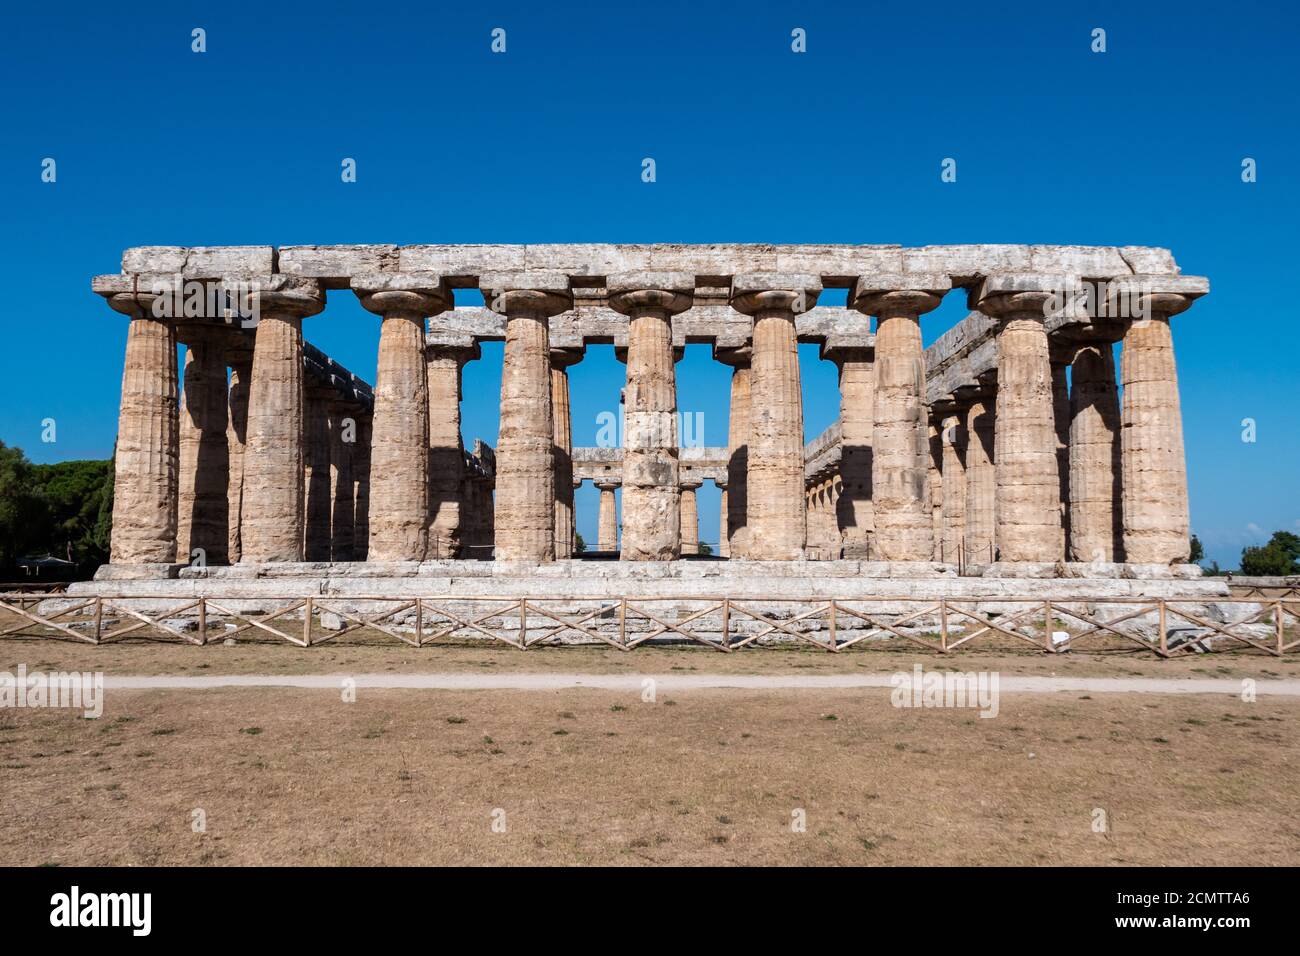 Archaic Temple or first Temple of Hera in Paestum, Italy also called Basilica, an Ancient Greek Temple Ruin Stock Photo